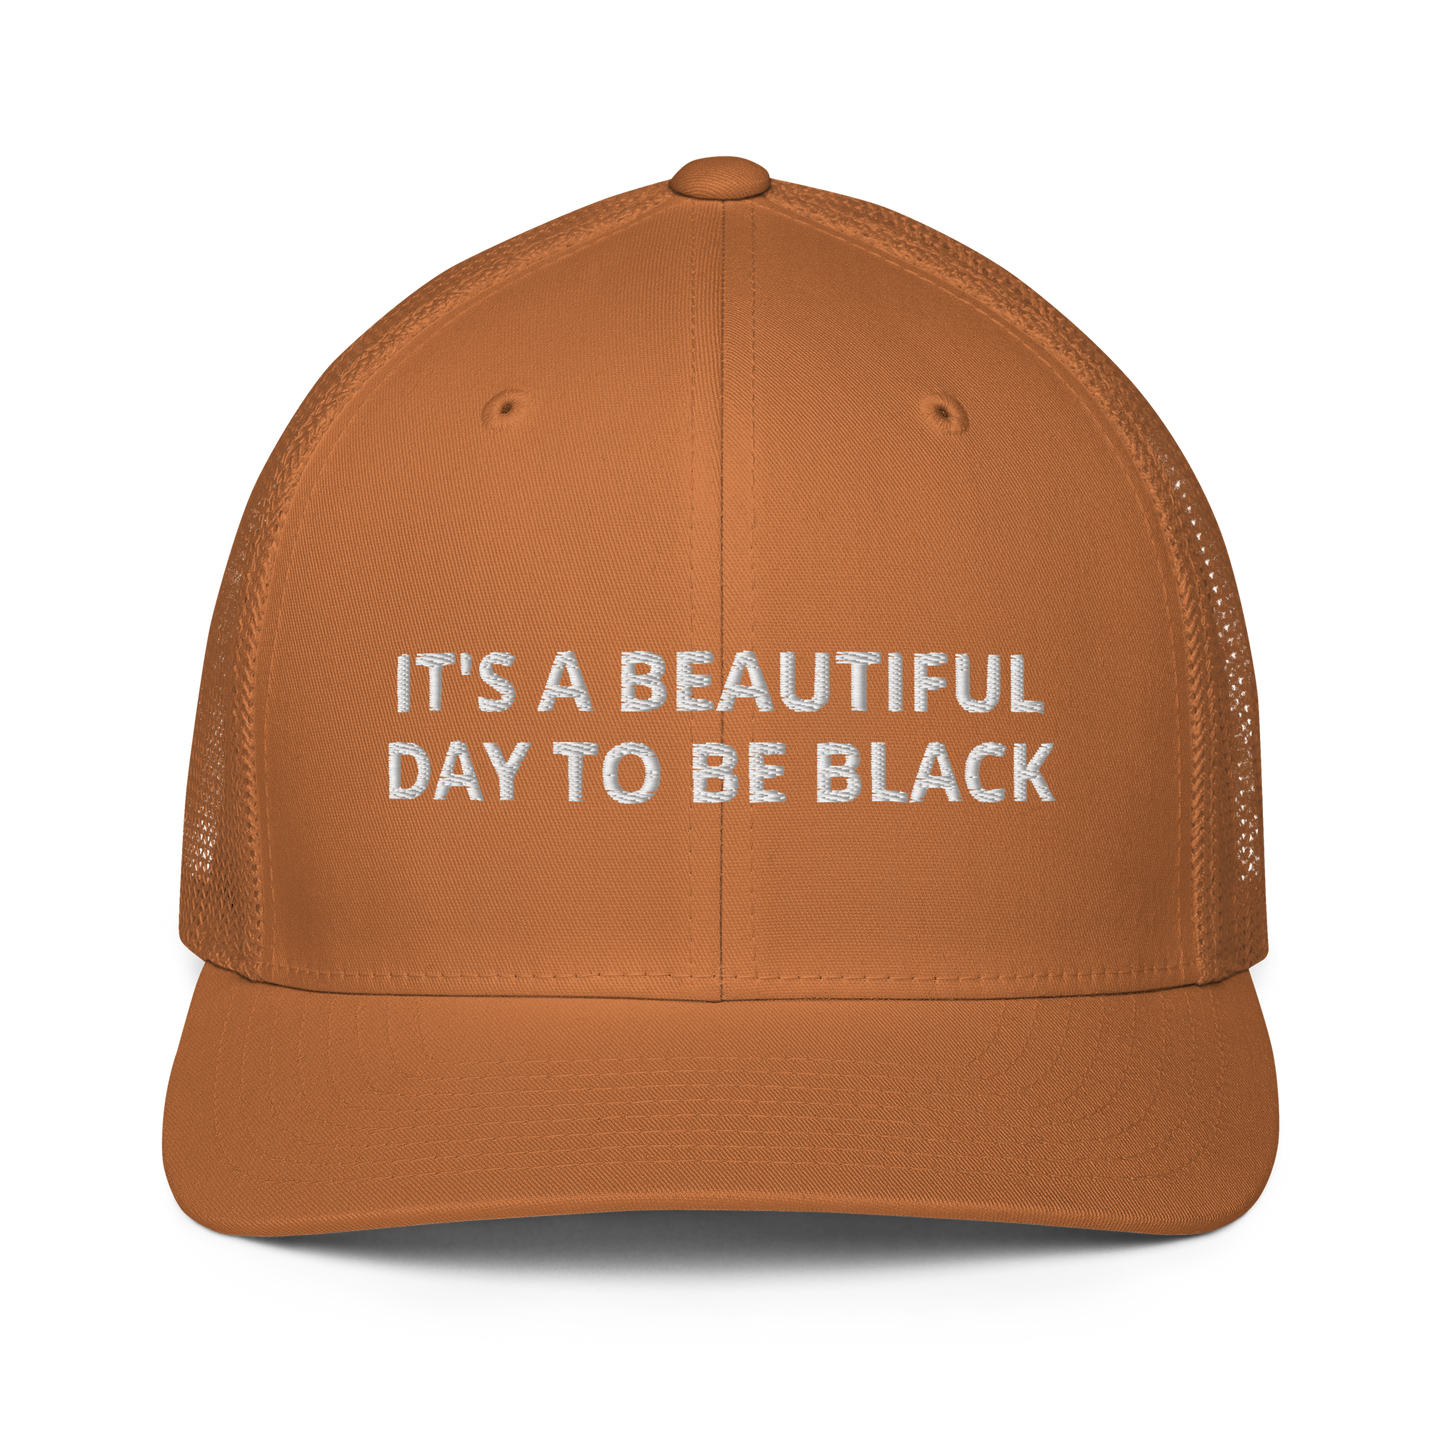 It's A Beautiful Day To Be Black Mesh Trucker Hat